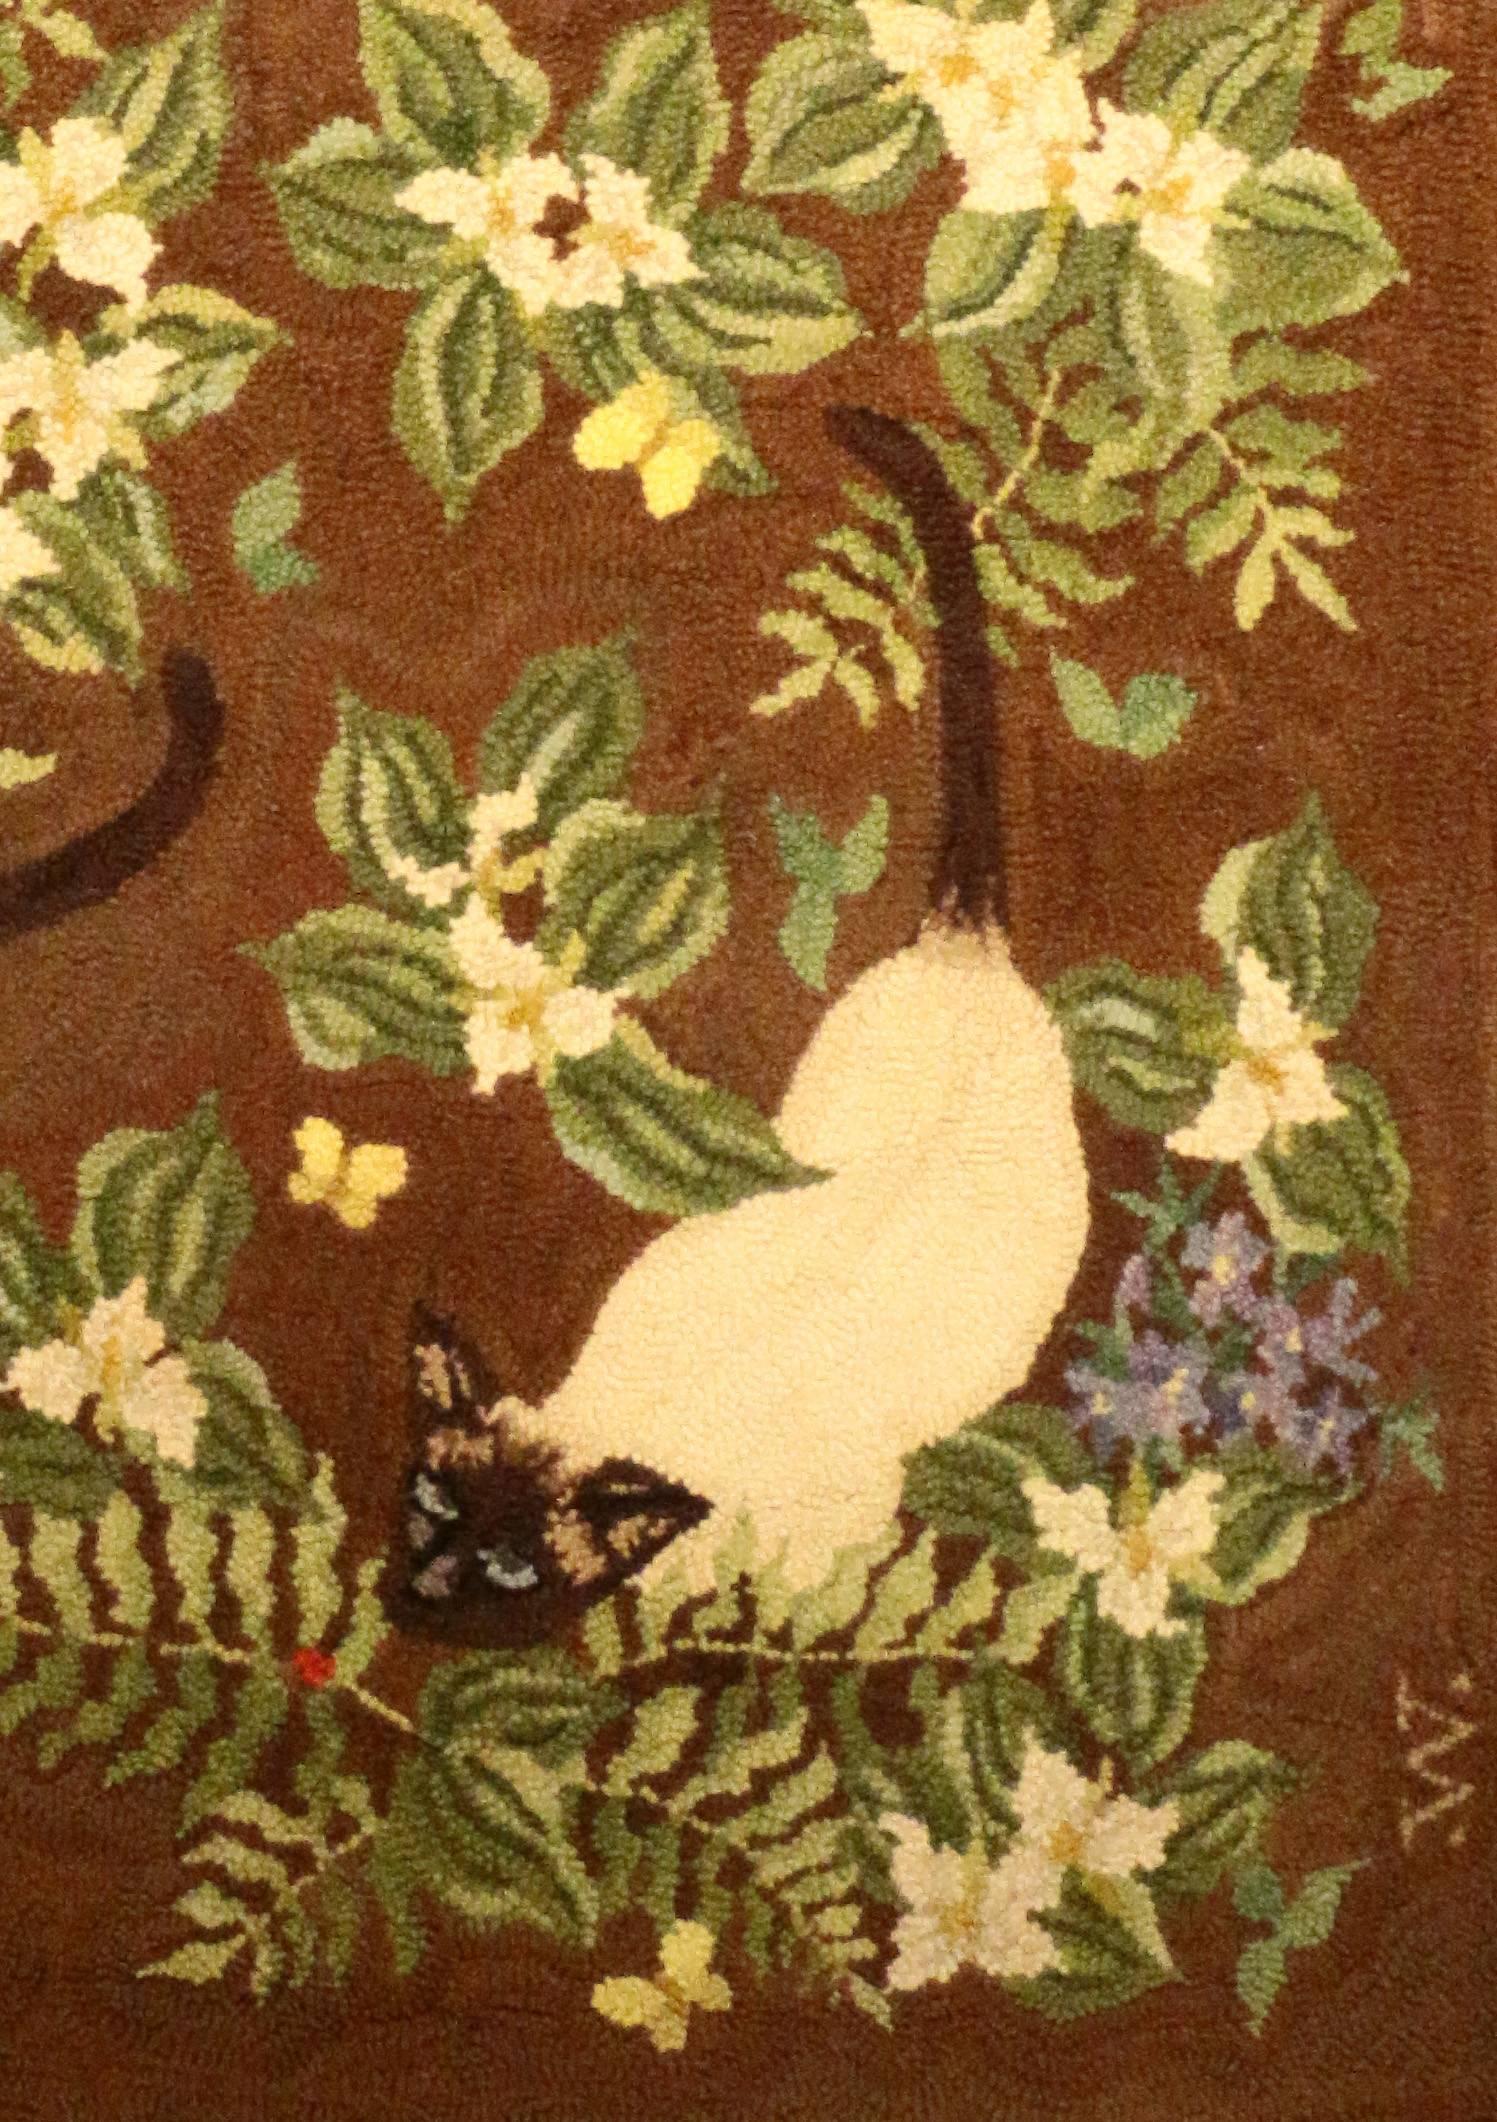 A hooked rug by George Wells Ruggery of Long Island, New York, depicting three Siamese cats amongst ferns and flowers. Each feline is studing a butterfly.
Established in 1920, The Ruggery specializes in creating custom designed hand hooked rugs for